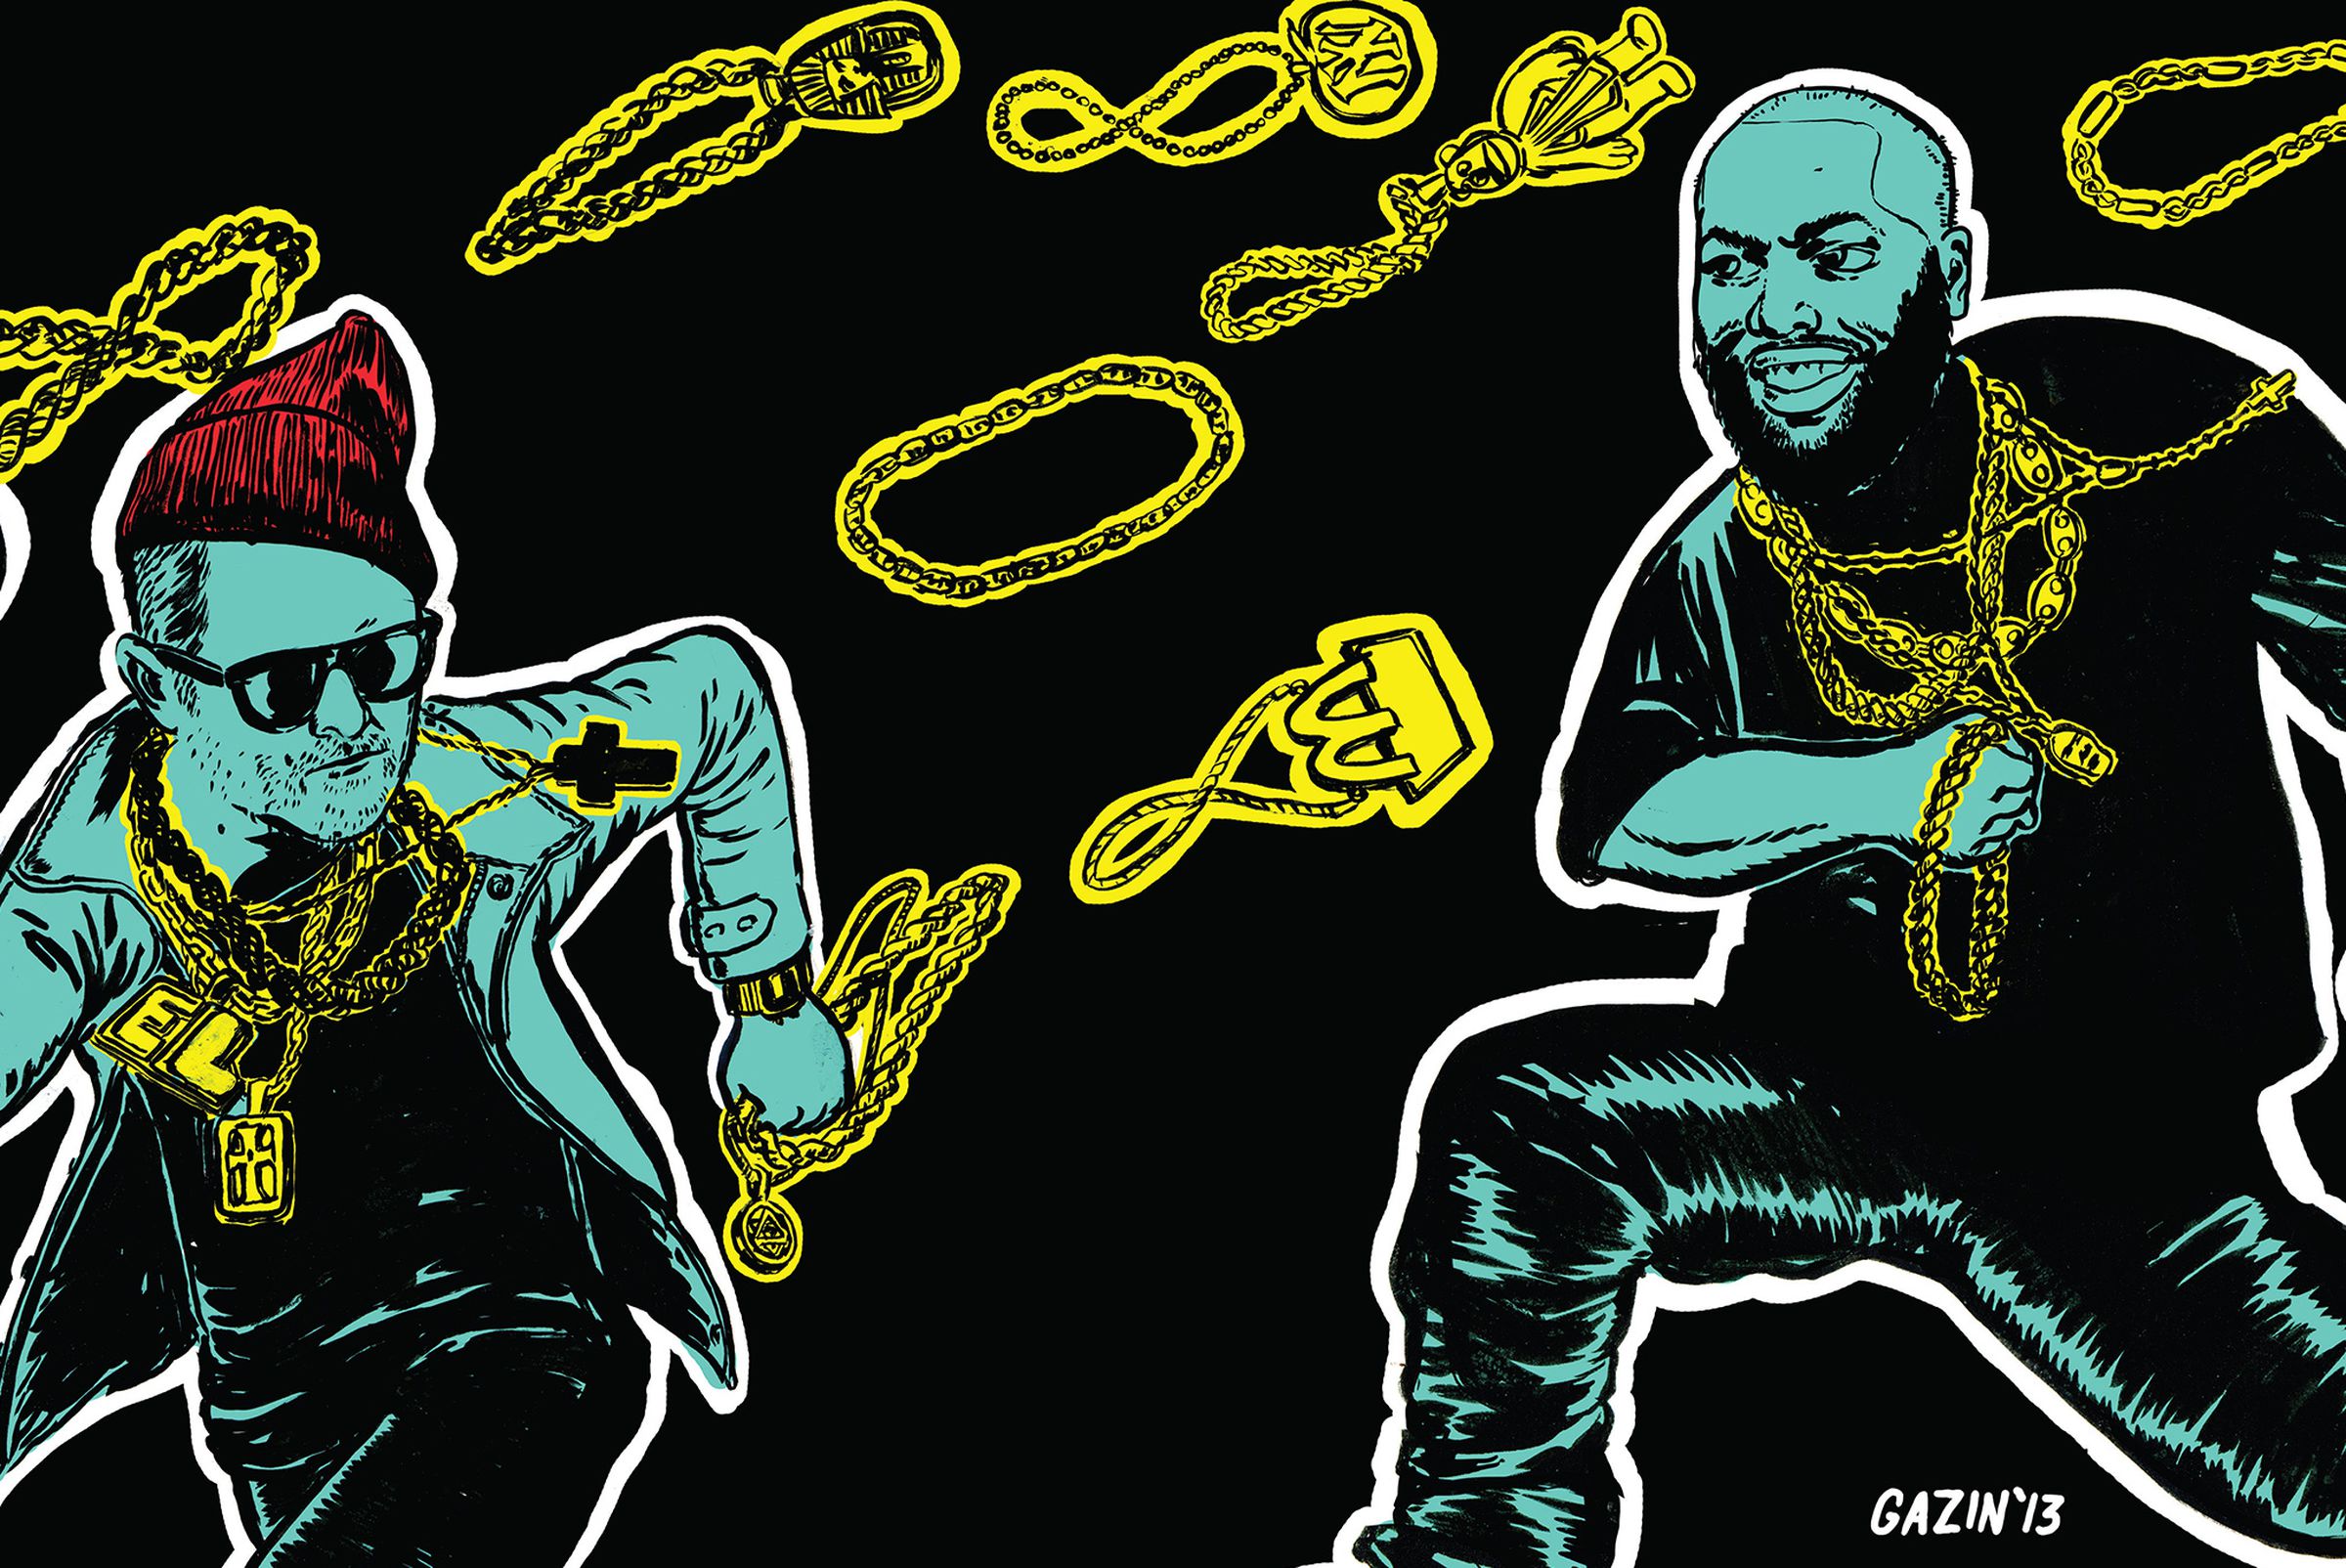 Package artwork for Run The Jewels 1.